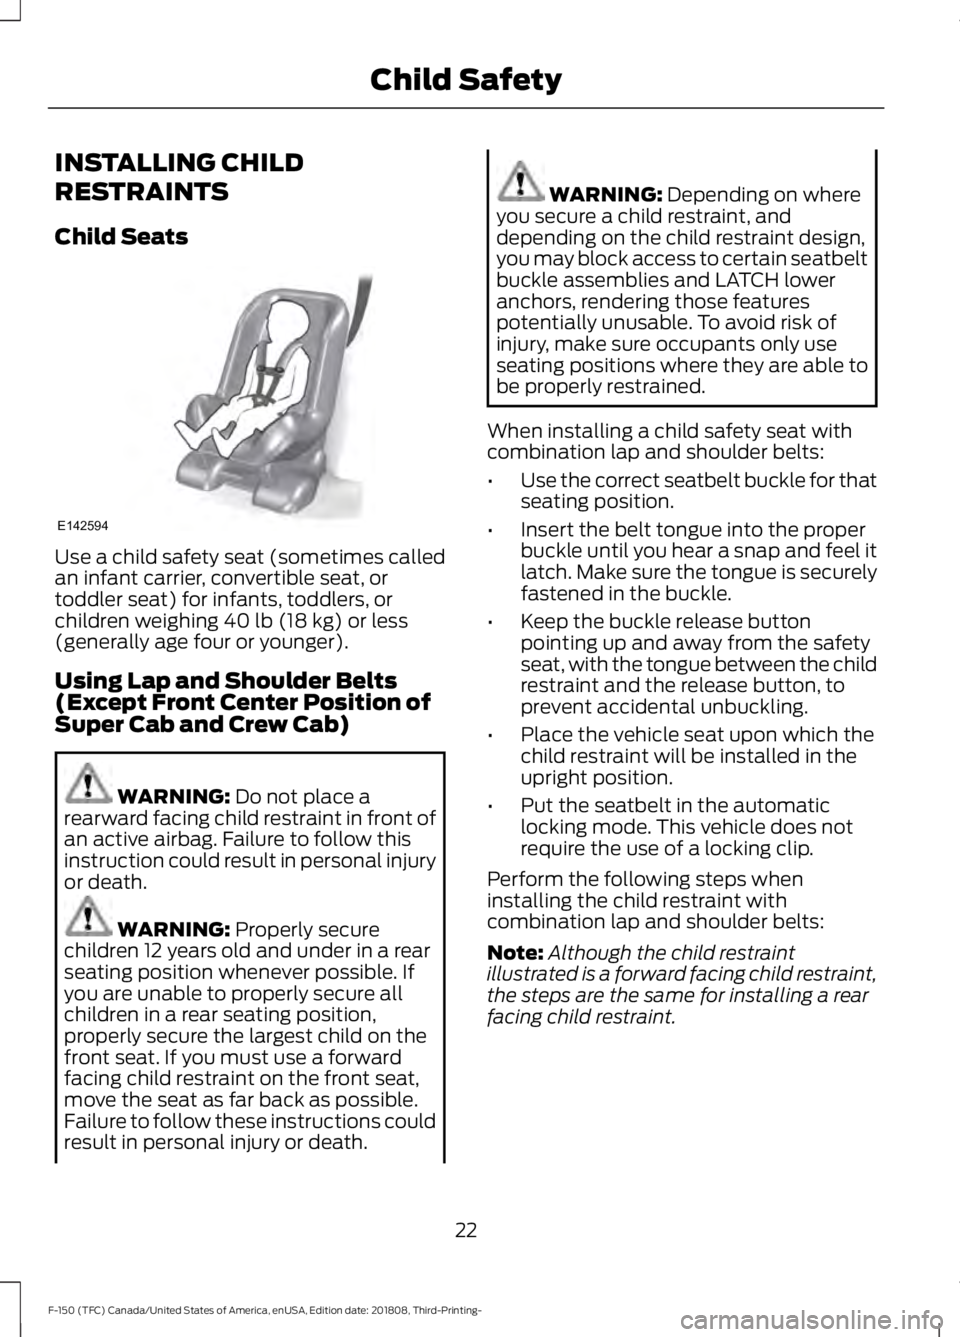 FORD F-150 2019  Owners Manual INSTALLING CHILD
RESTRAINTS
Child Seats
Use a child safety seat (sometimes called
an infant carrier, convertible seat, or
toddler seat) for infants, toddlers, or
children weighing 40 lb (18 kg) or les